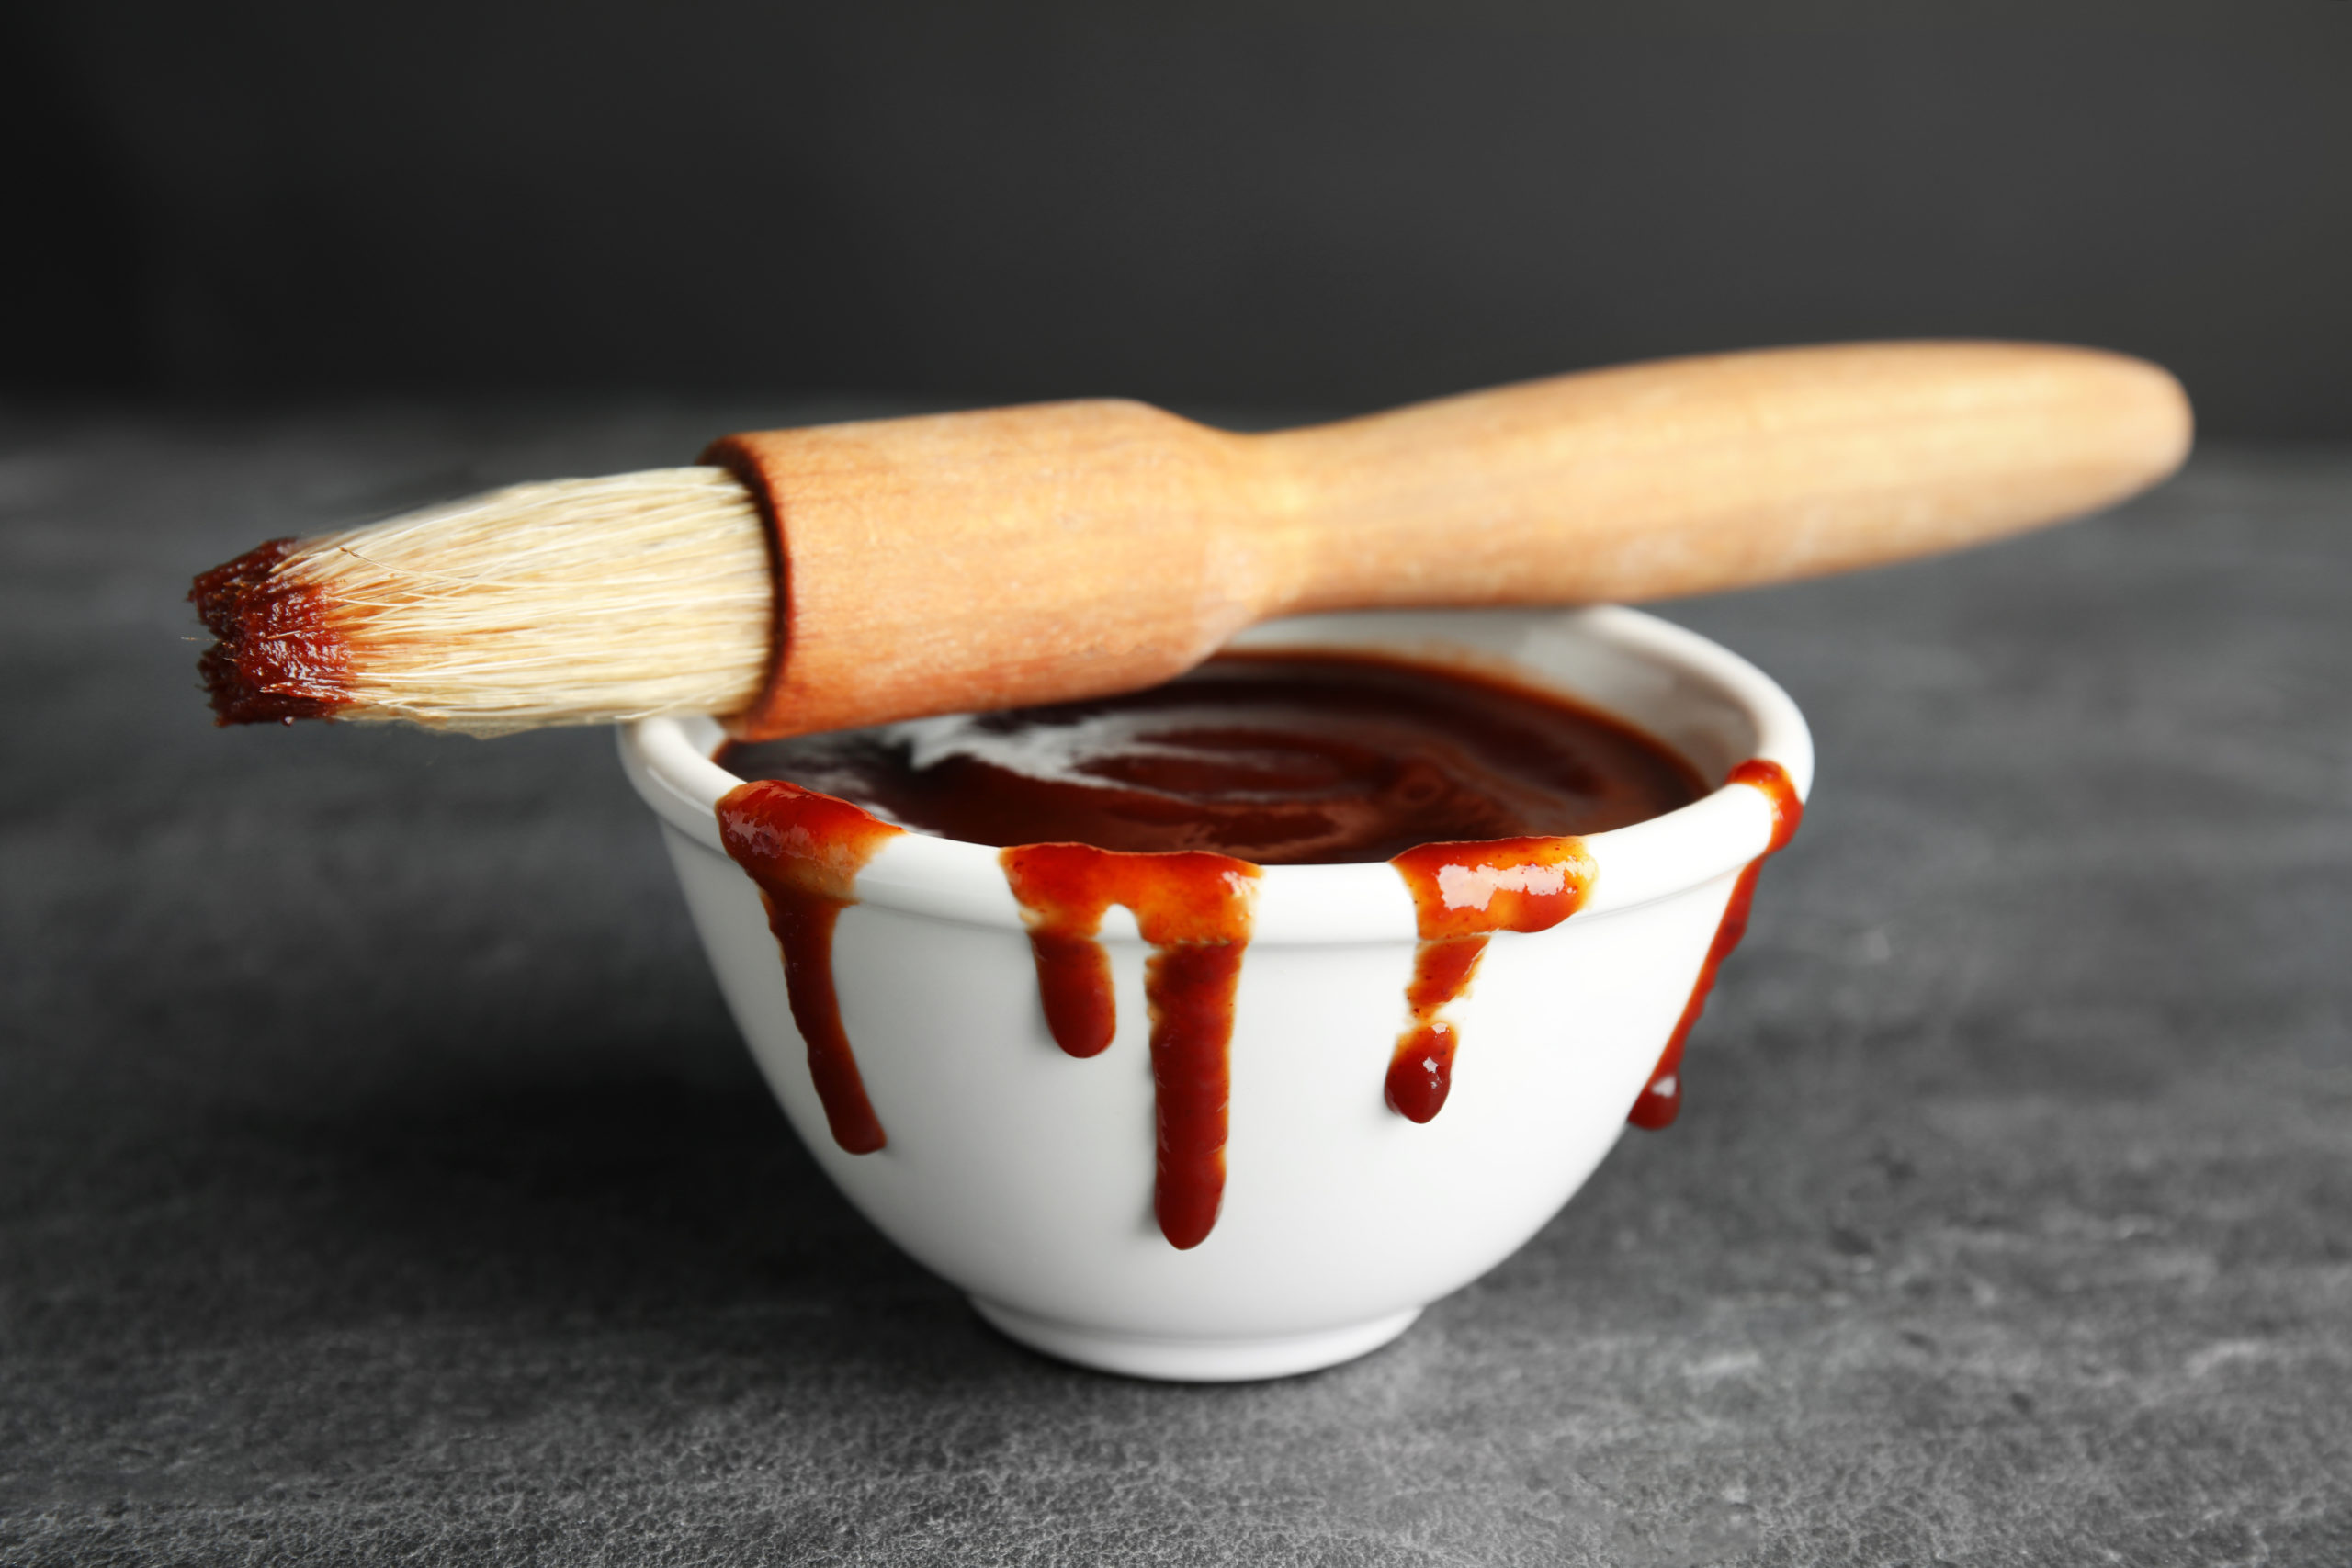 A bowl of cannabis-infused Chocolate Barbecue Sauce featuring Nove Cafe Cappuccino bar